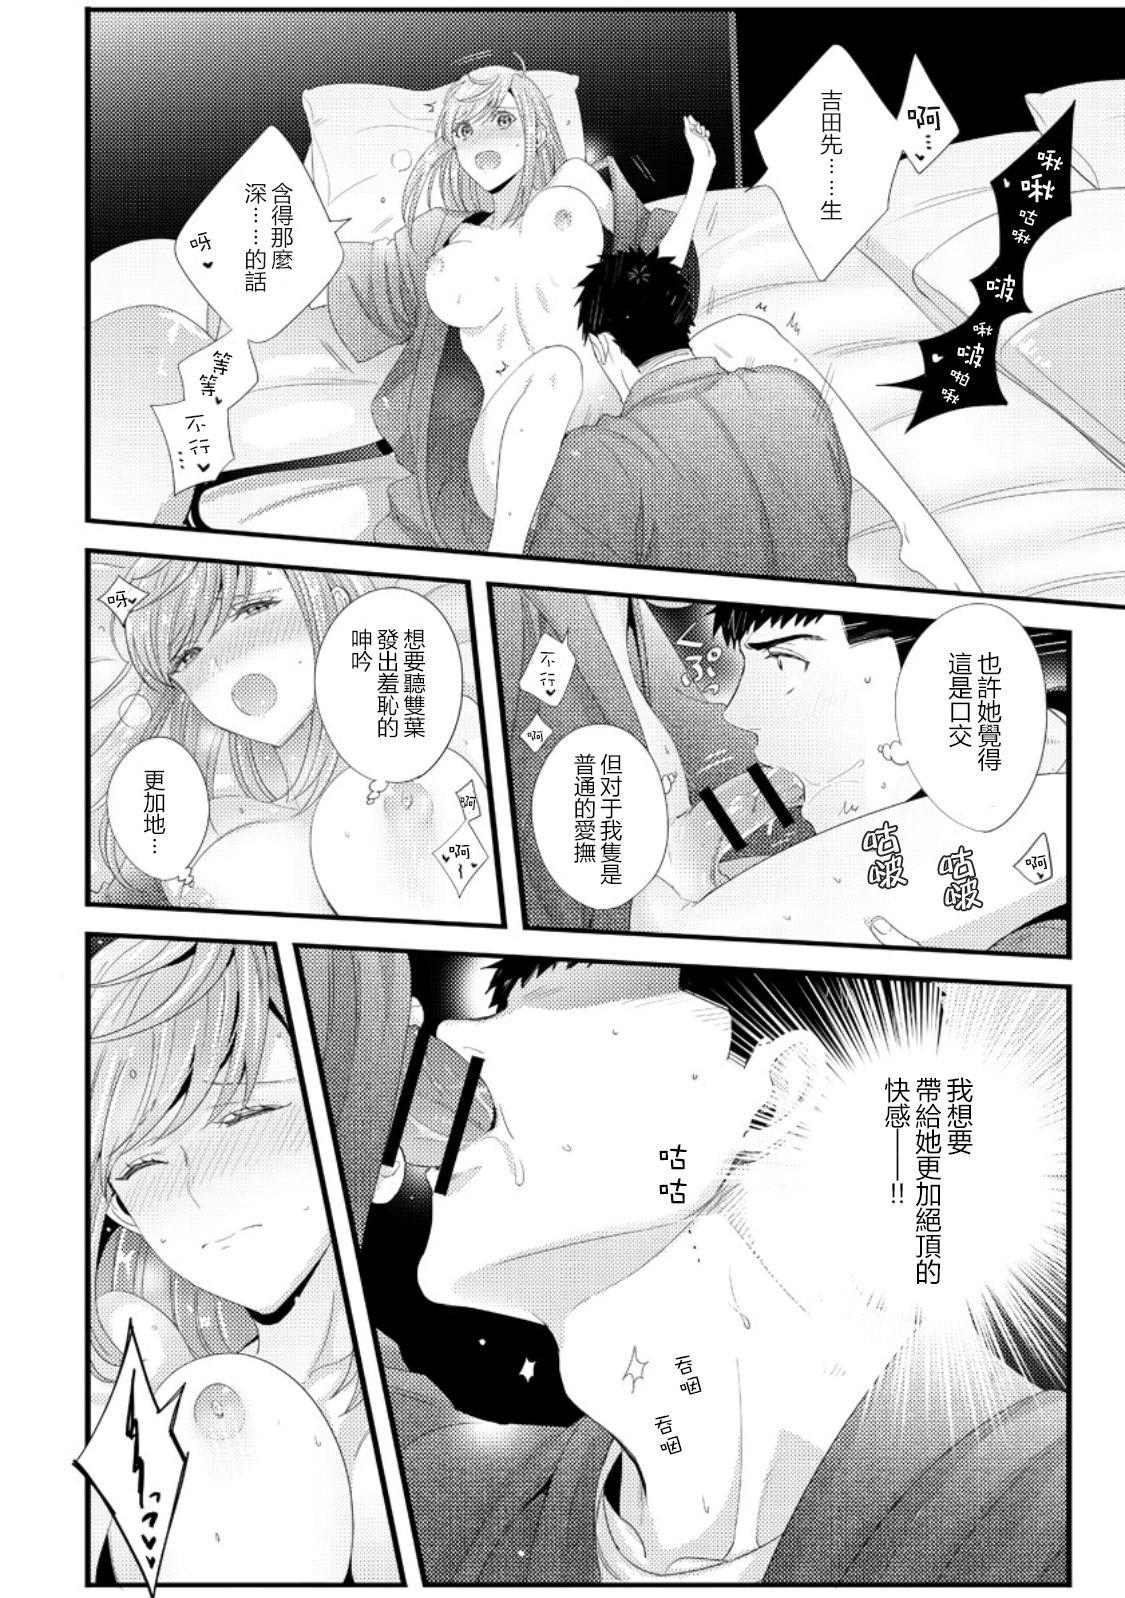 Please Let Me Hold You Futaba-San! Ch.1 21